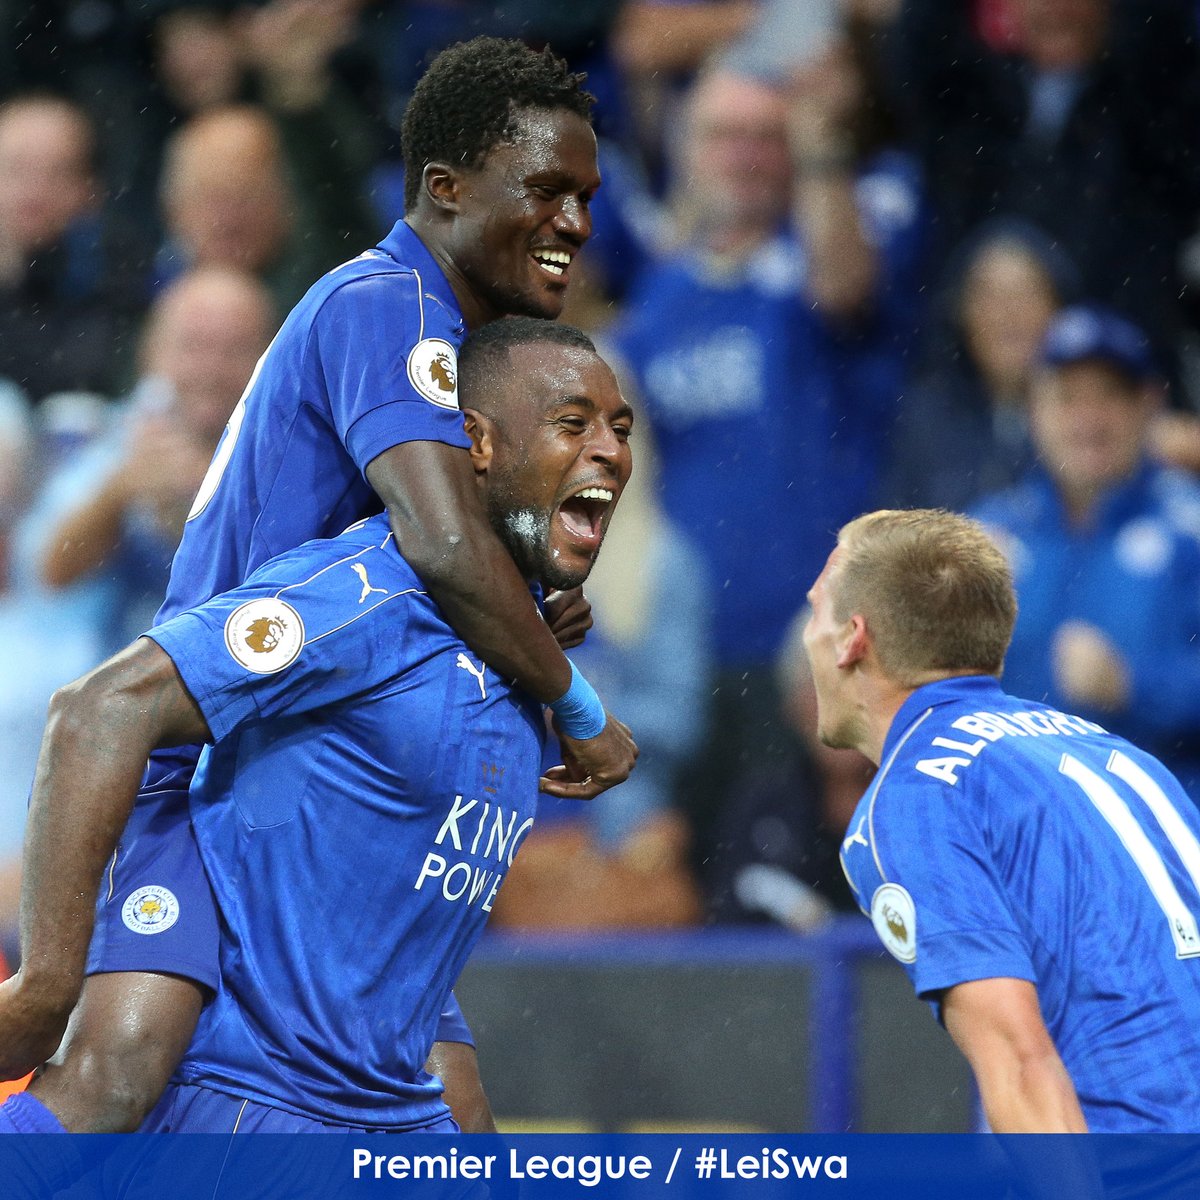 I’ll Keep Working Hard to secure a permanent spot at Leicester City: Daniel Amartey